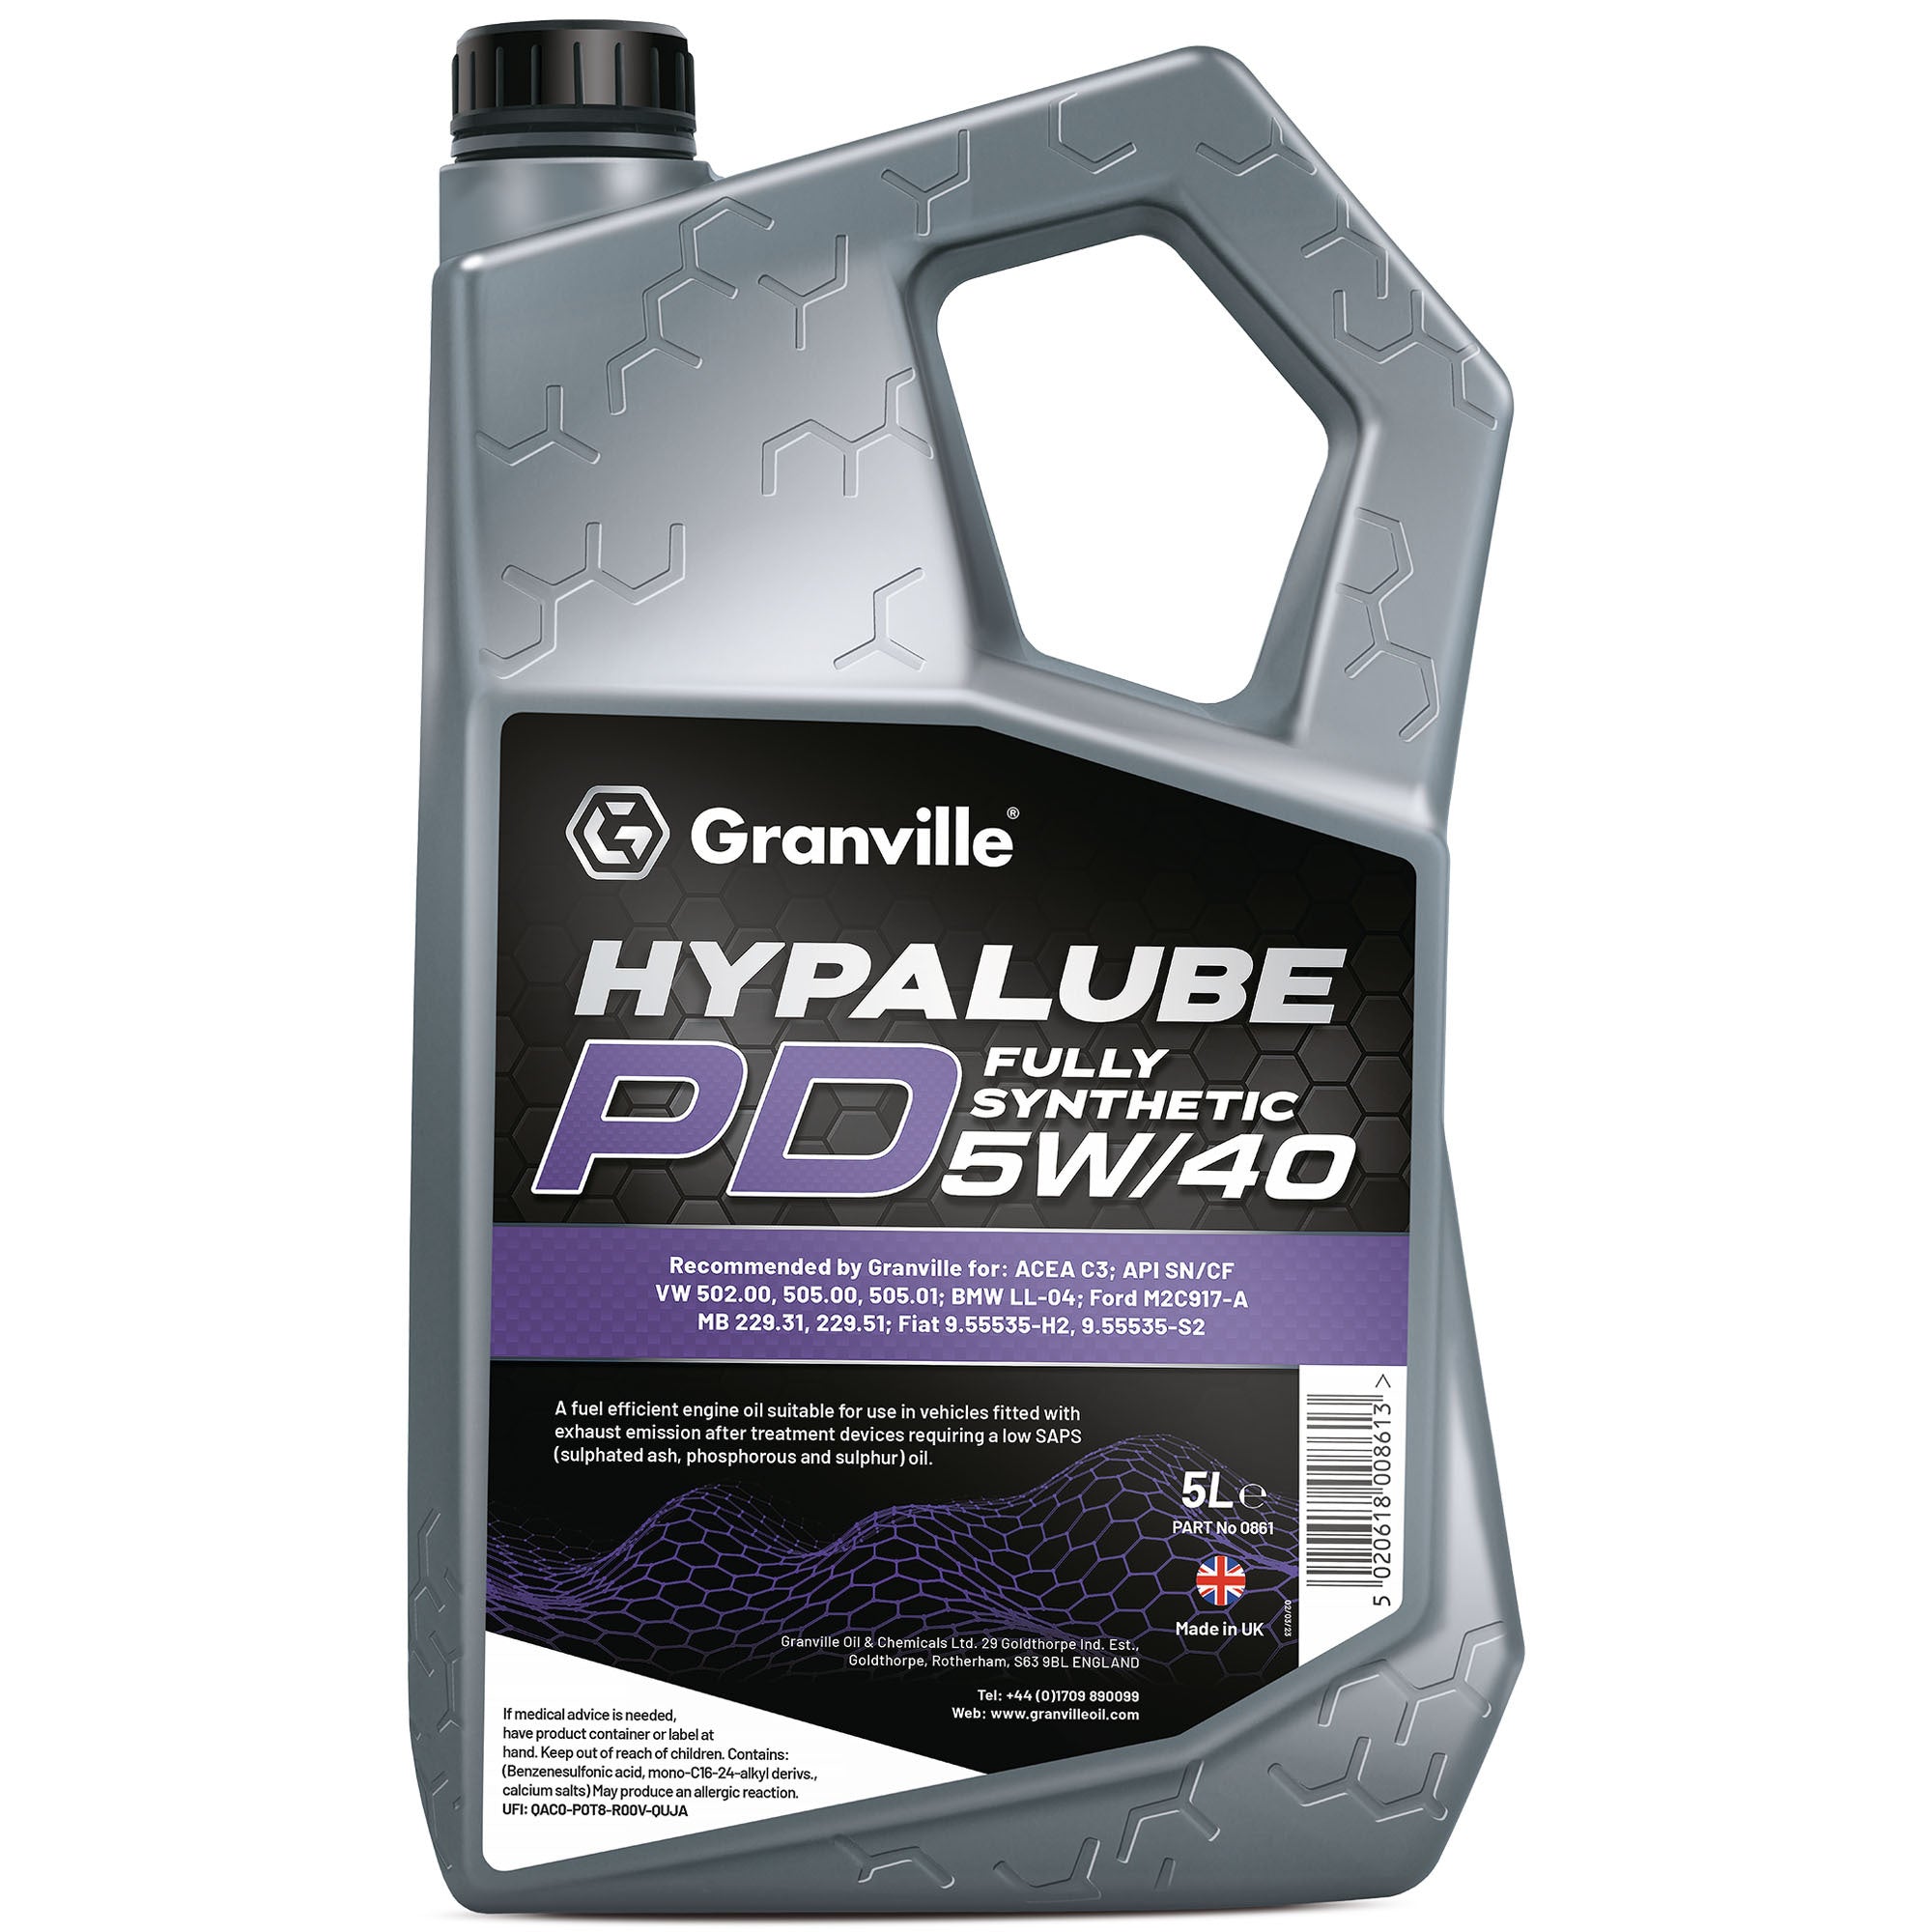 Granville Hypalube Pd Fully Synthetic 5W/40 5 Litres